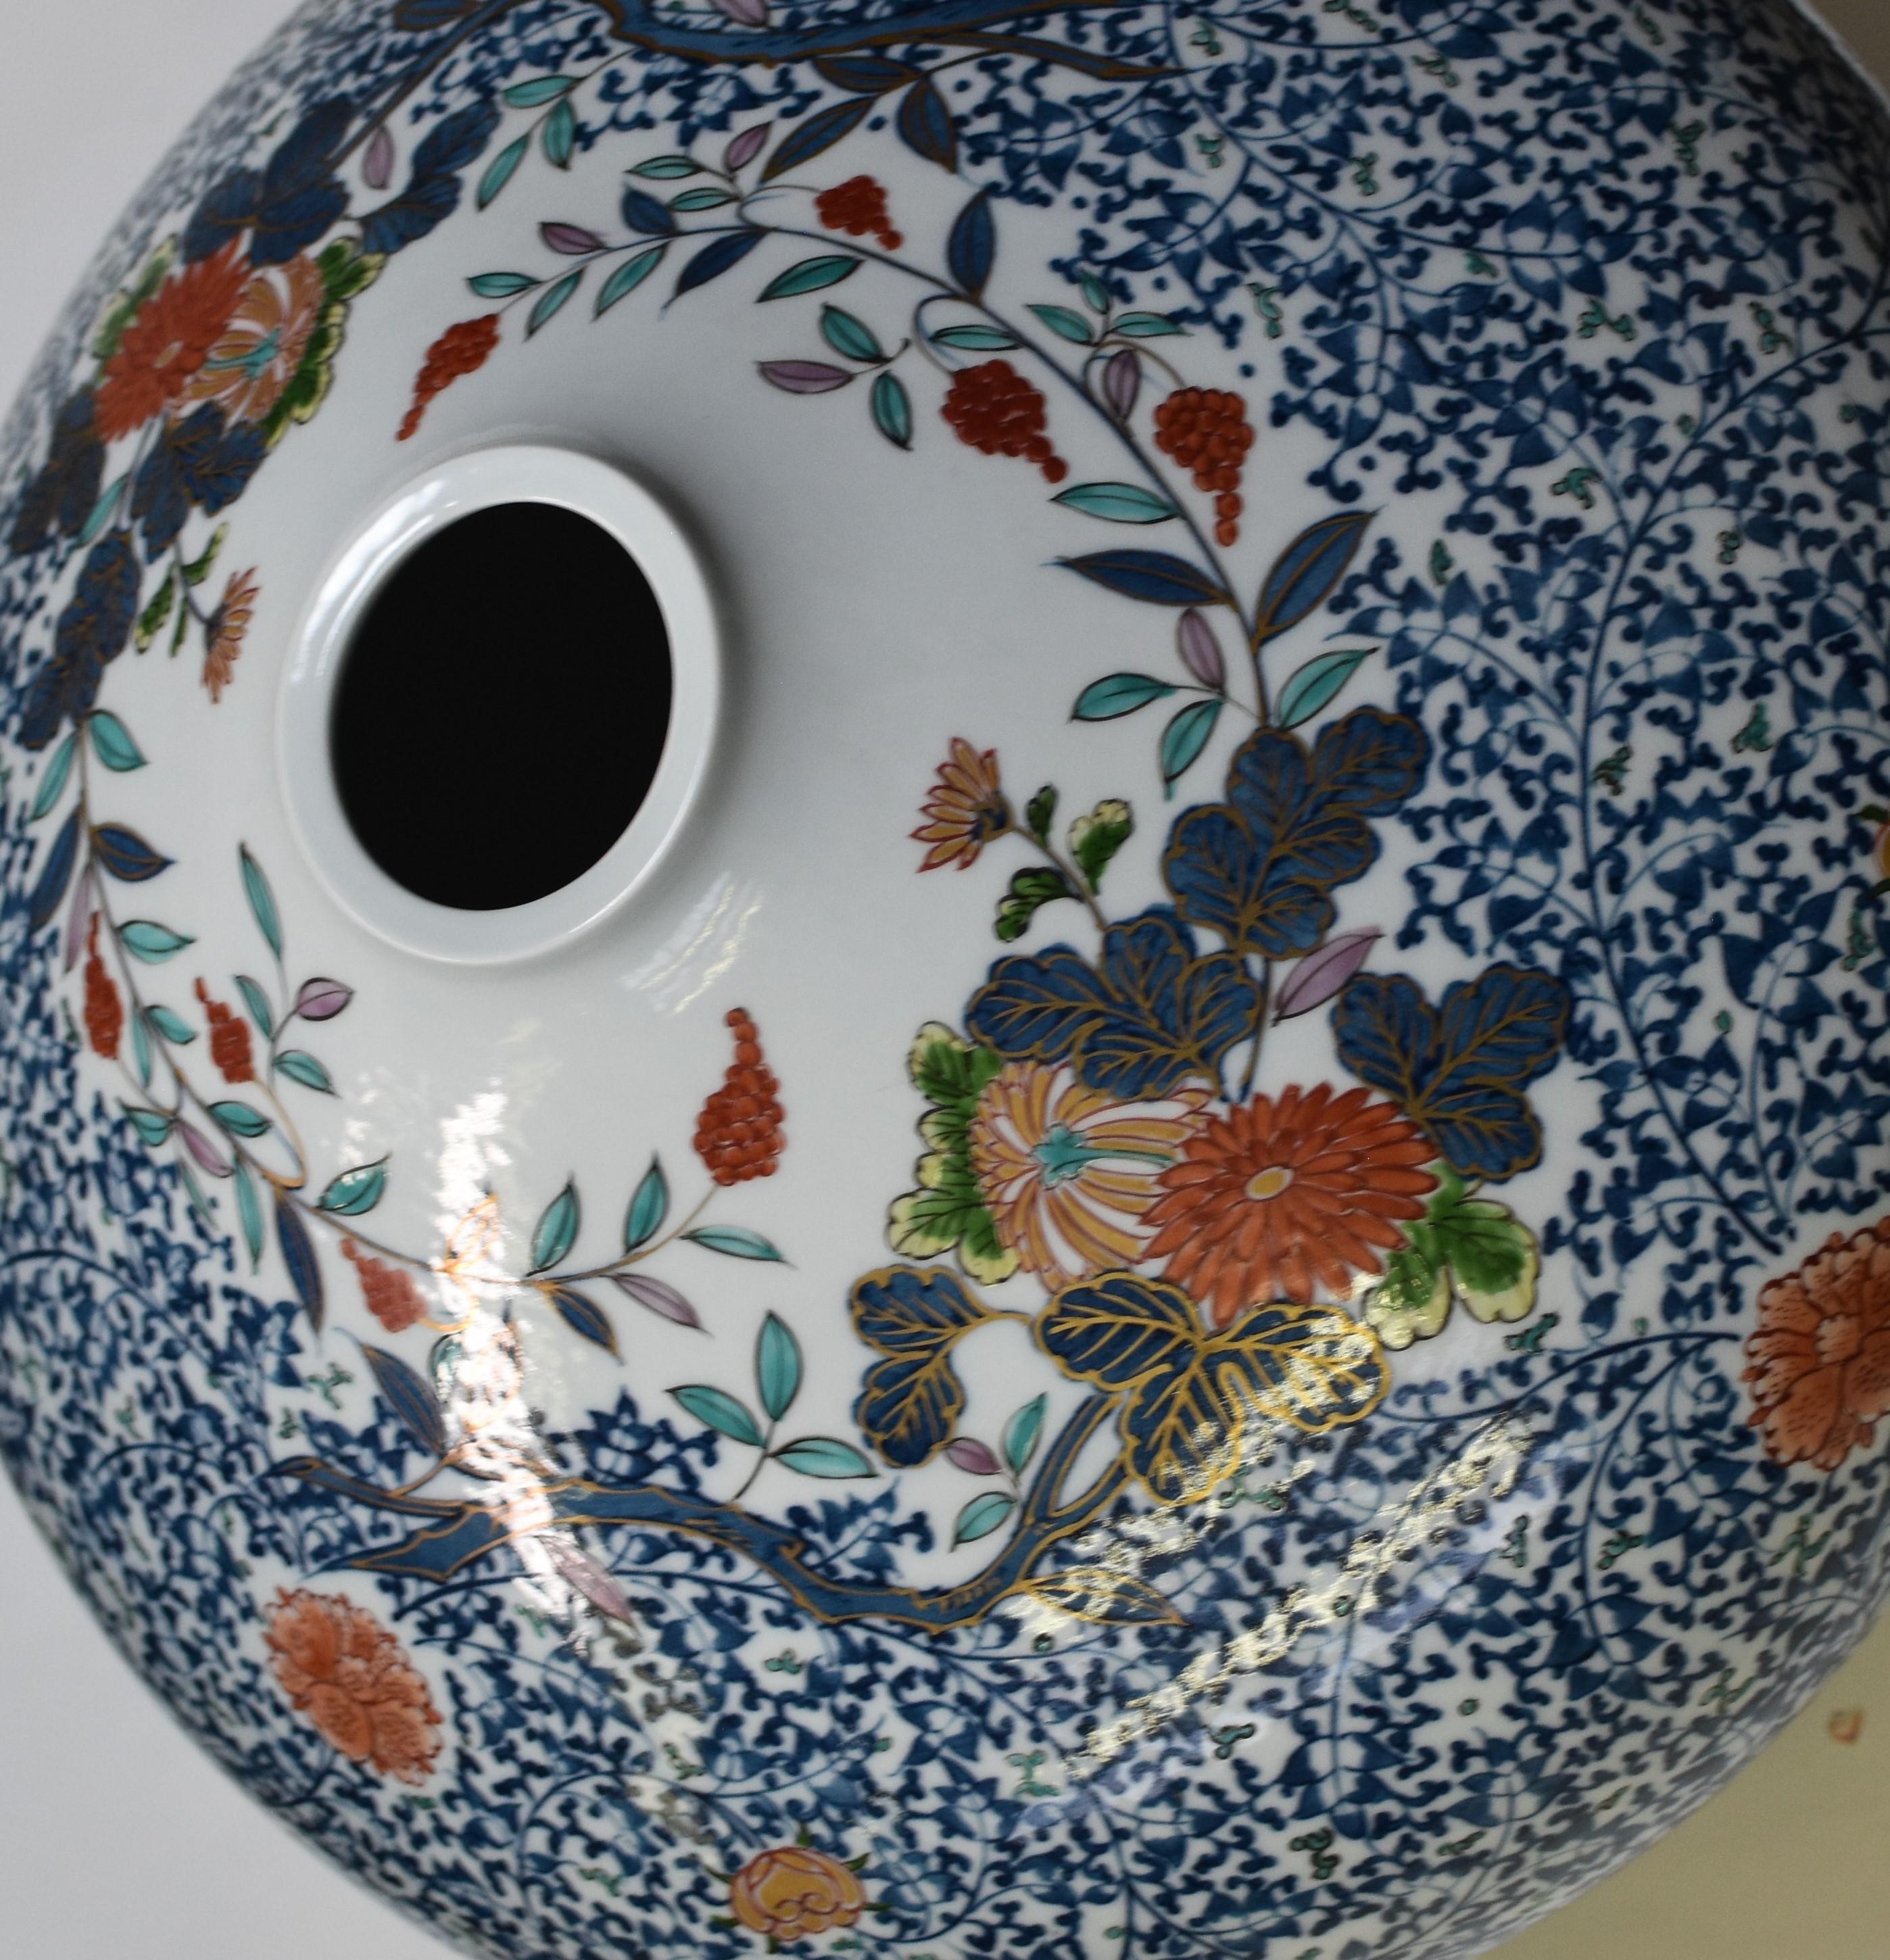 Extraordinary large Japanese contemporary Imari porcelain vase, extremely intricately hand-painted in the artist's signature pattern in vivid red and green, cobalt blue underglaze on a stunningly shaped large rotund body, a signed mastepiece by